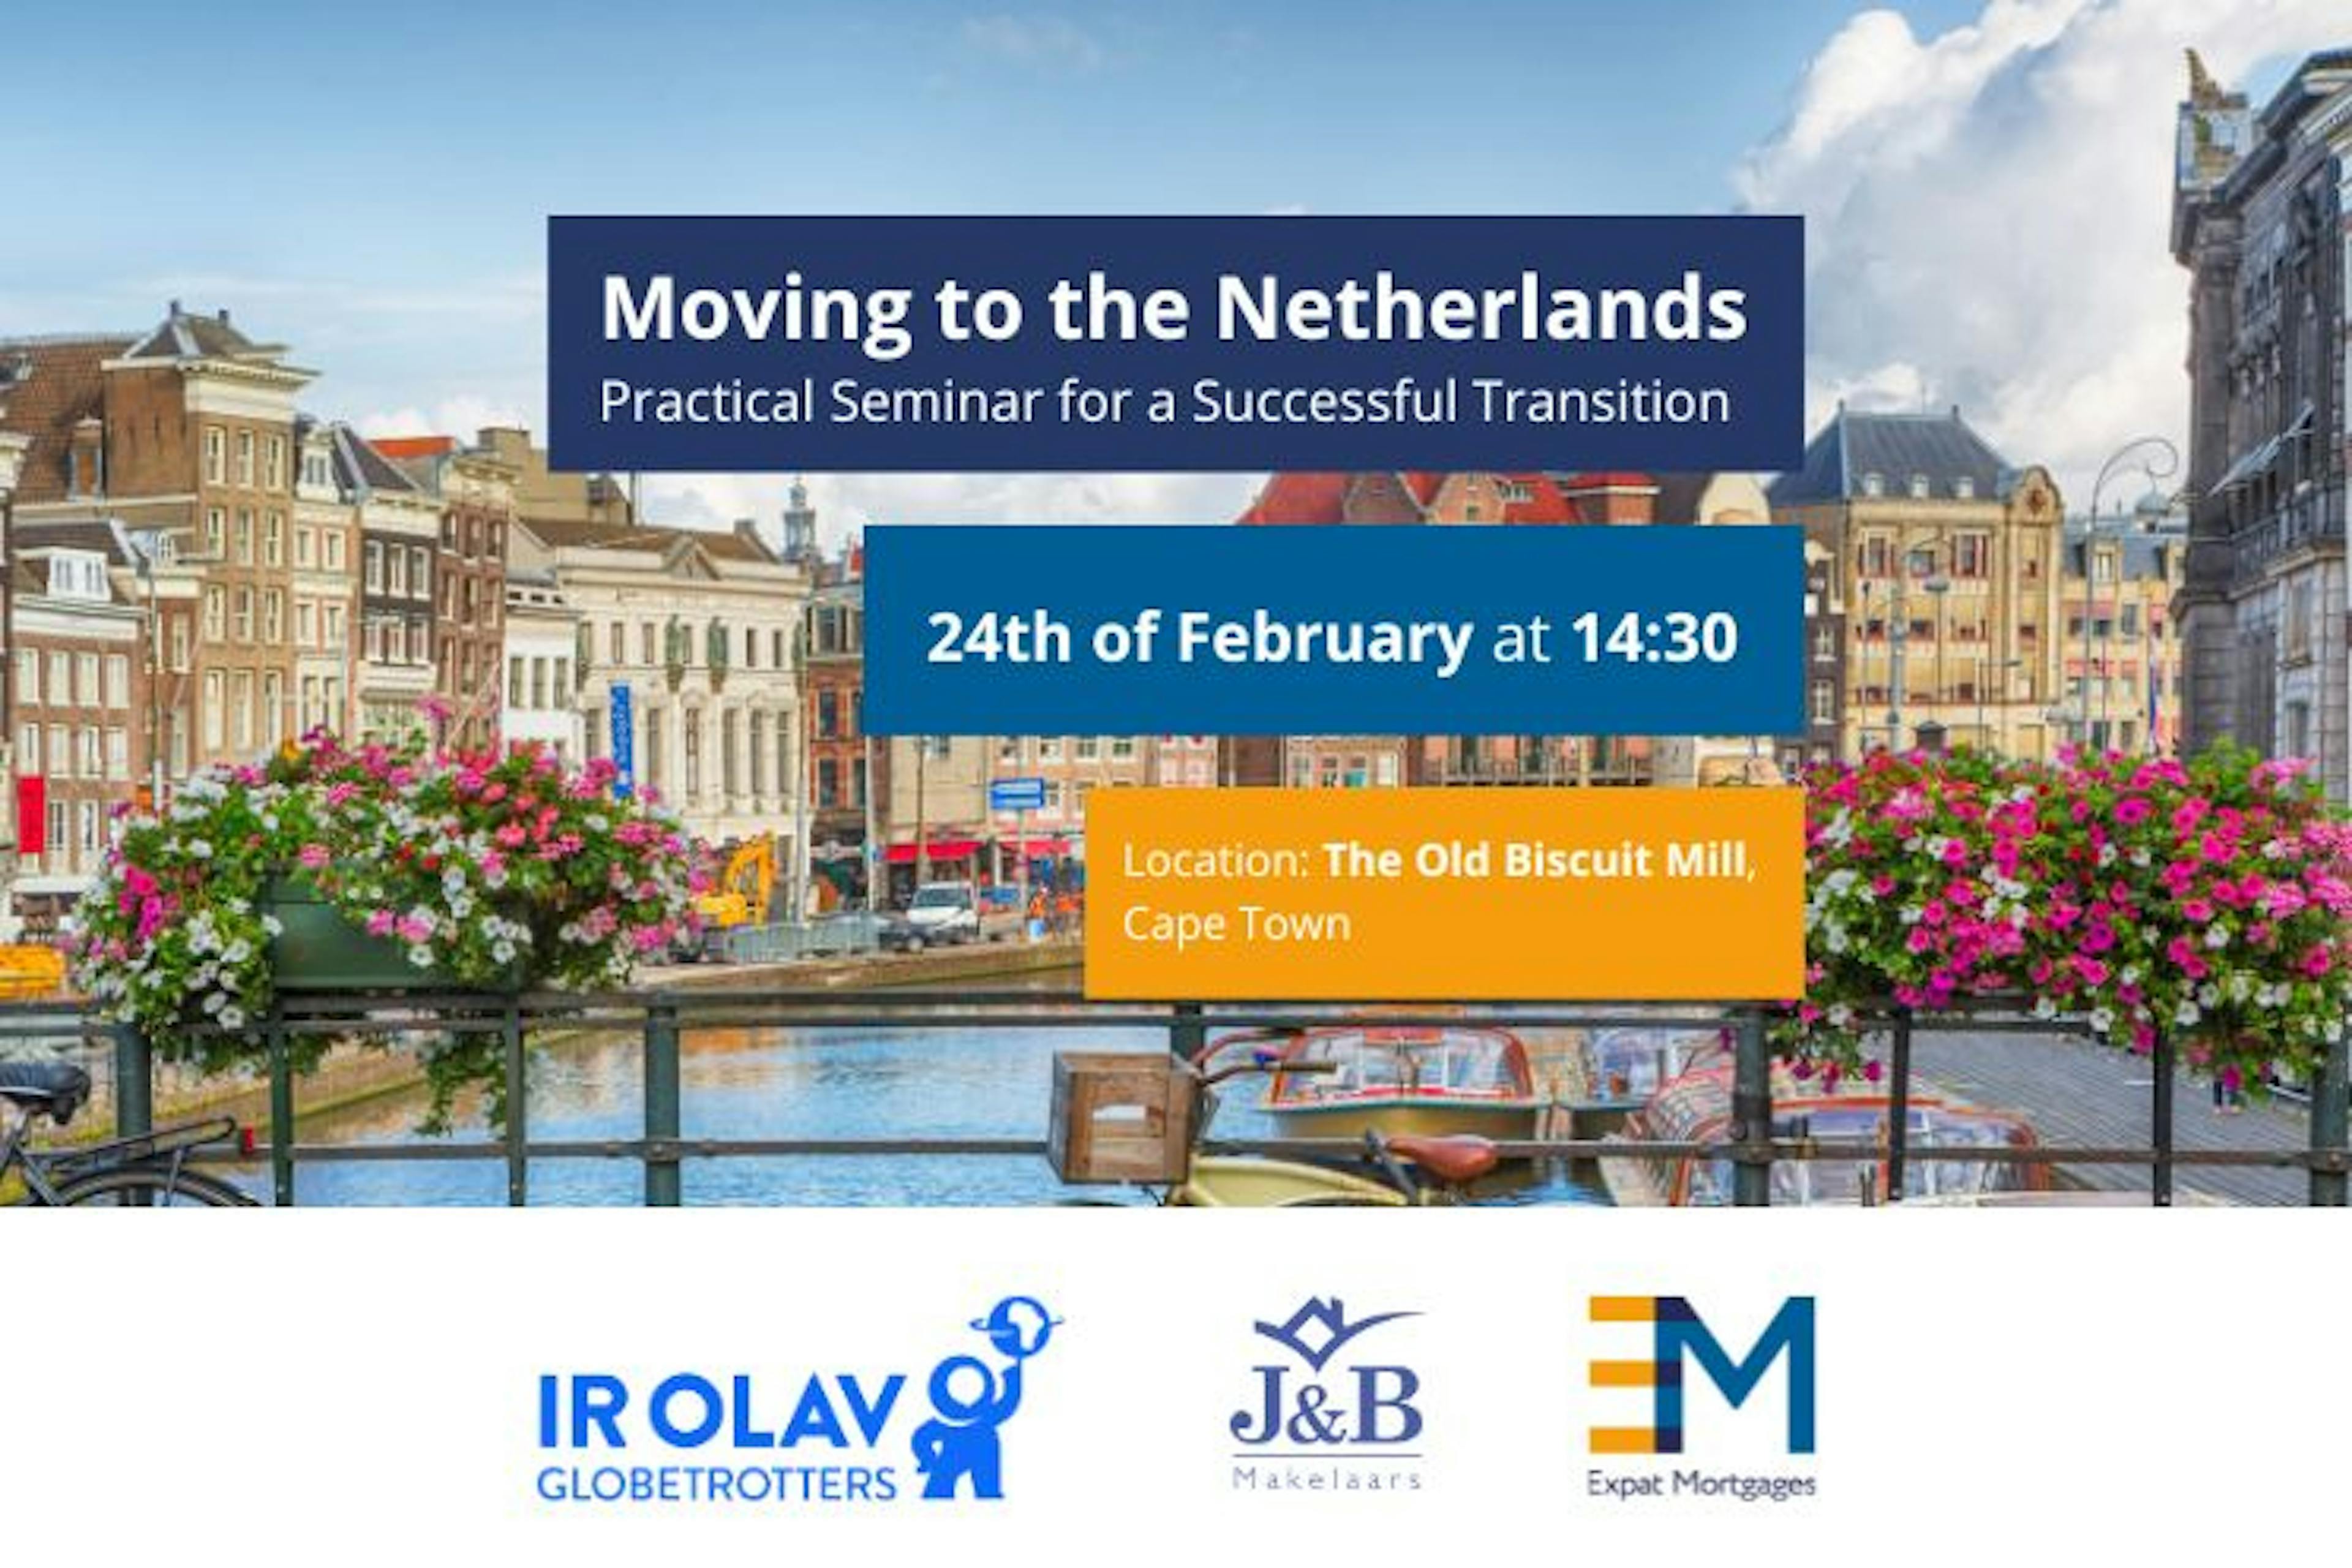 Moving to the Netherlands: Practical Seminar for a Successful Transition